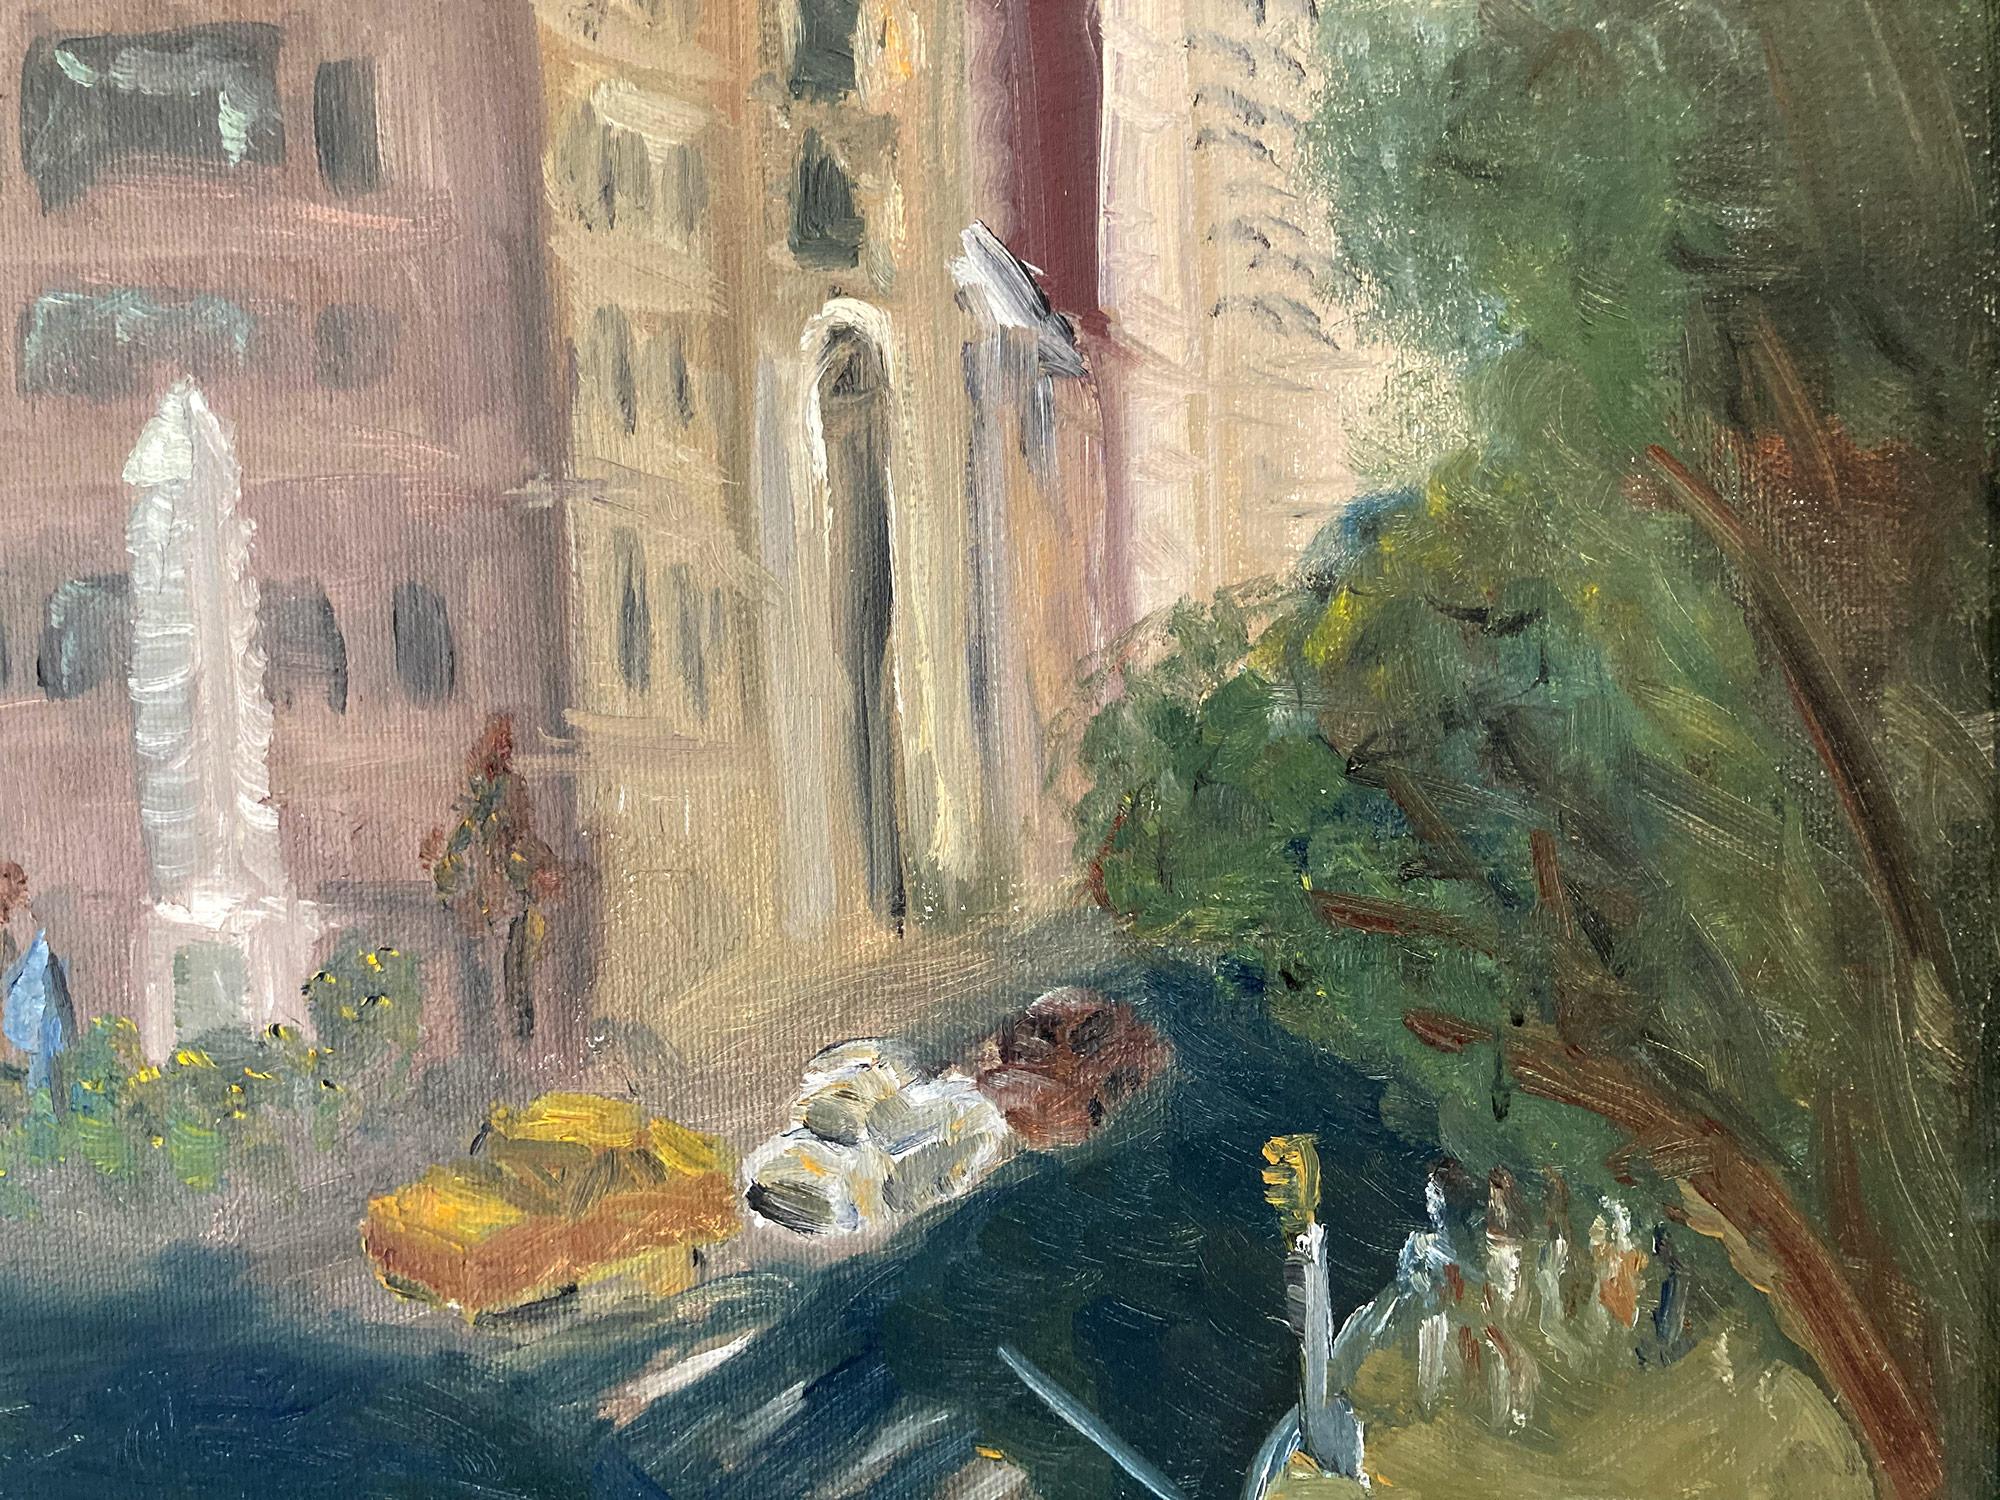 This painting depicts an impressionistic scene of New York City of the Empire State Building from Madison Square Park and 5th Avenue in the summer on a busy day with cars on the streets. This painting was painted on sight by the artist in